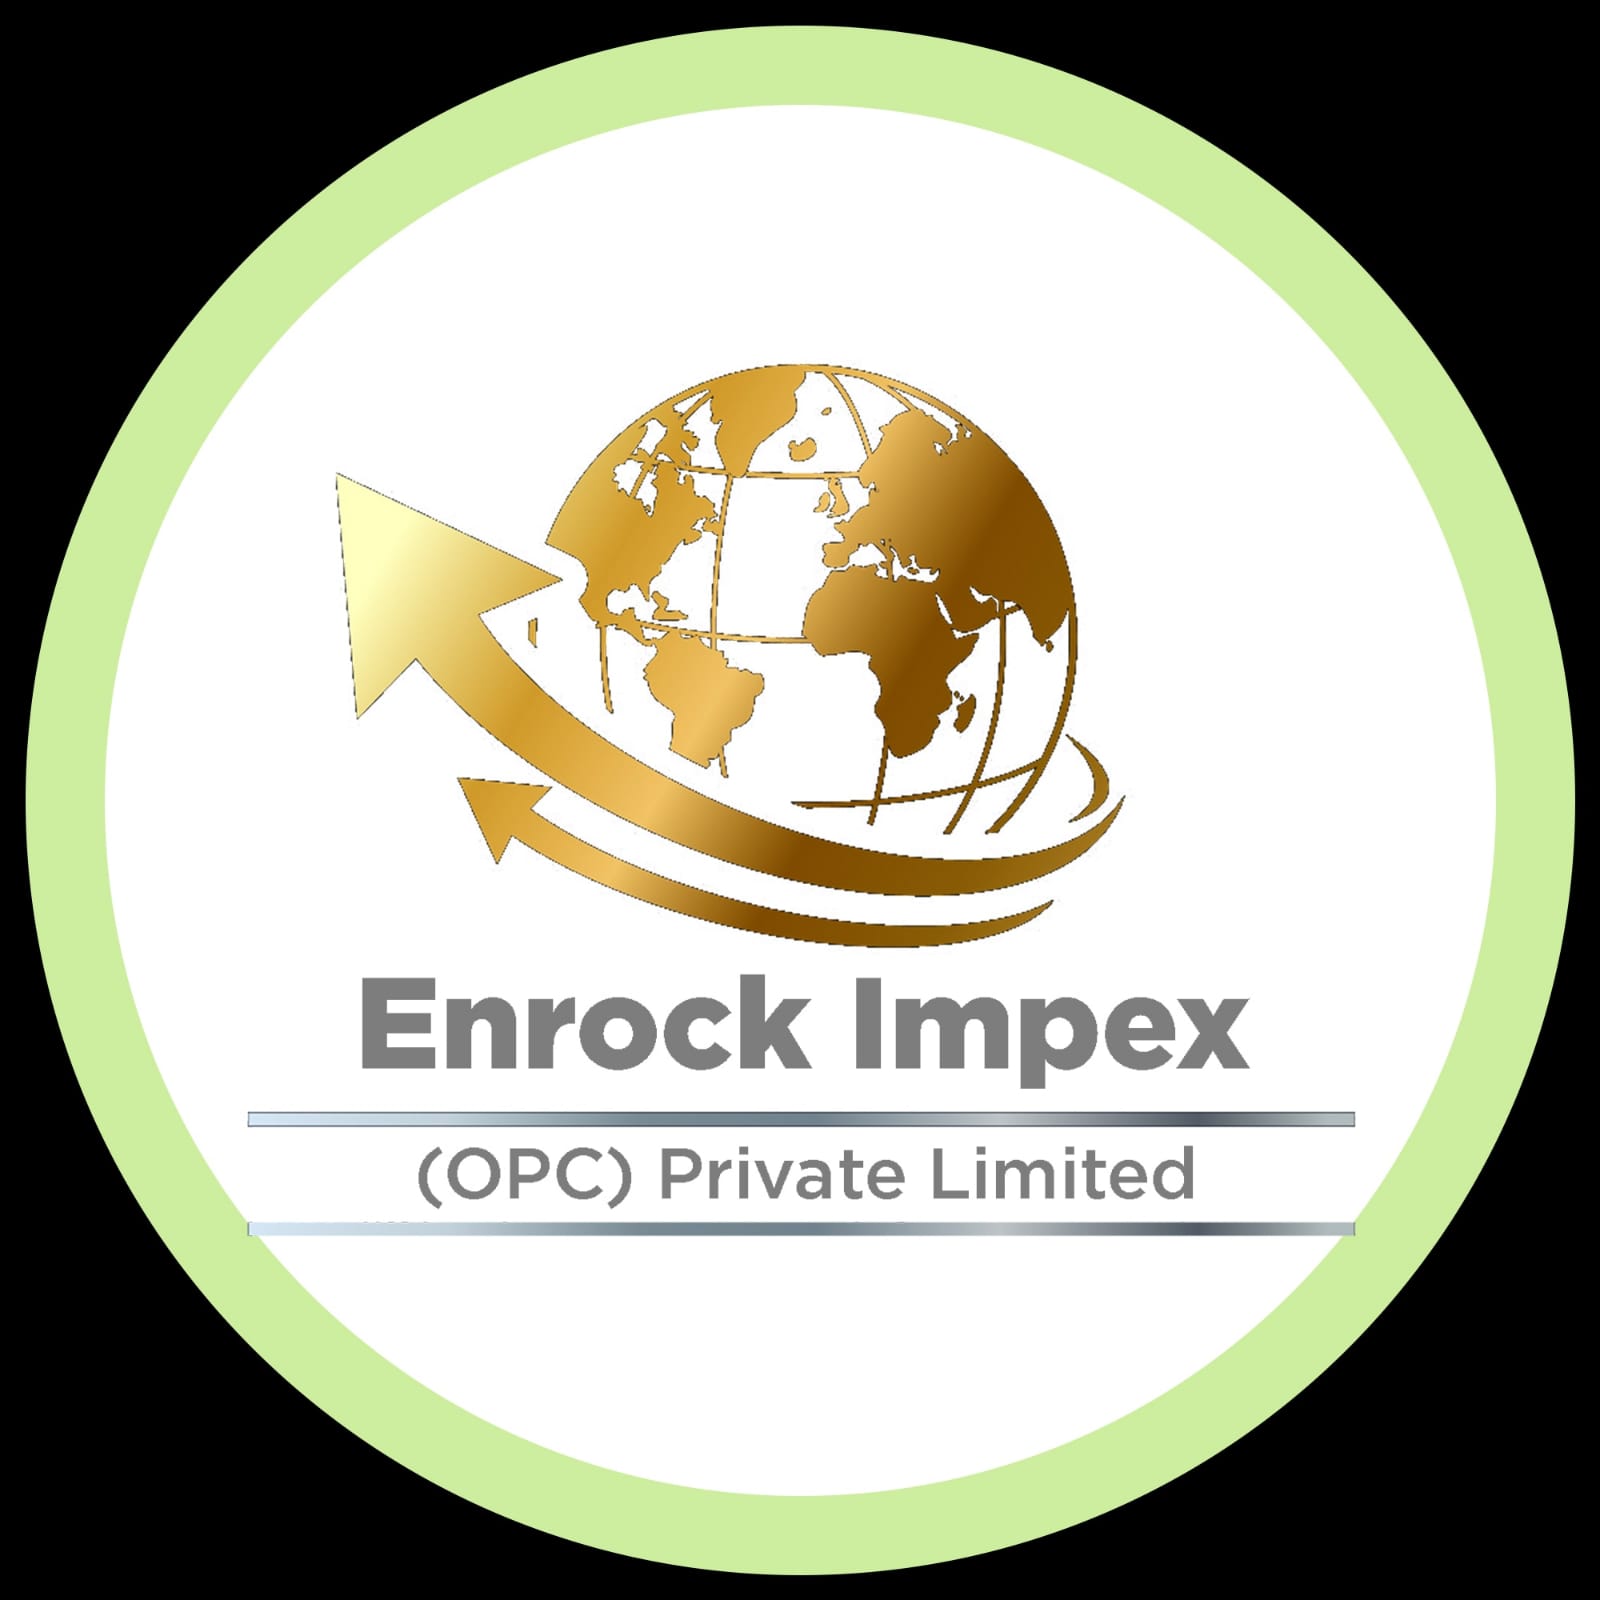 Enrock Impex Opc Private Limited